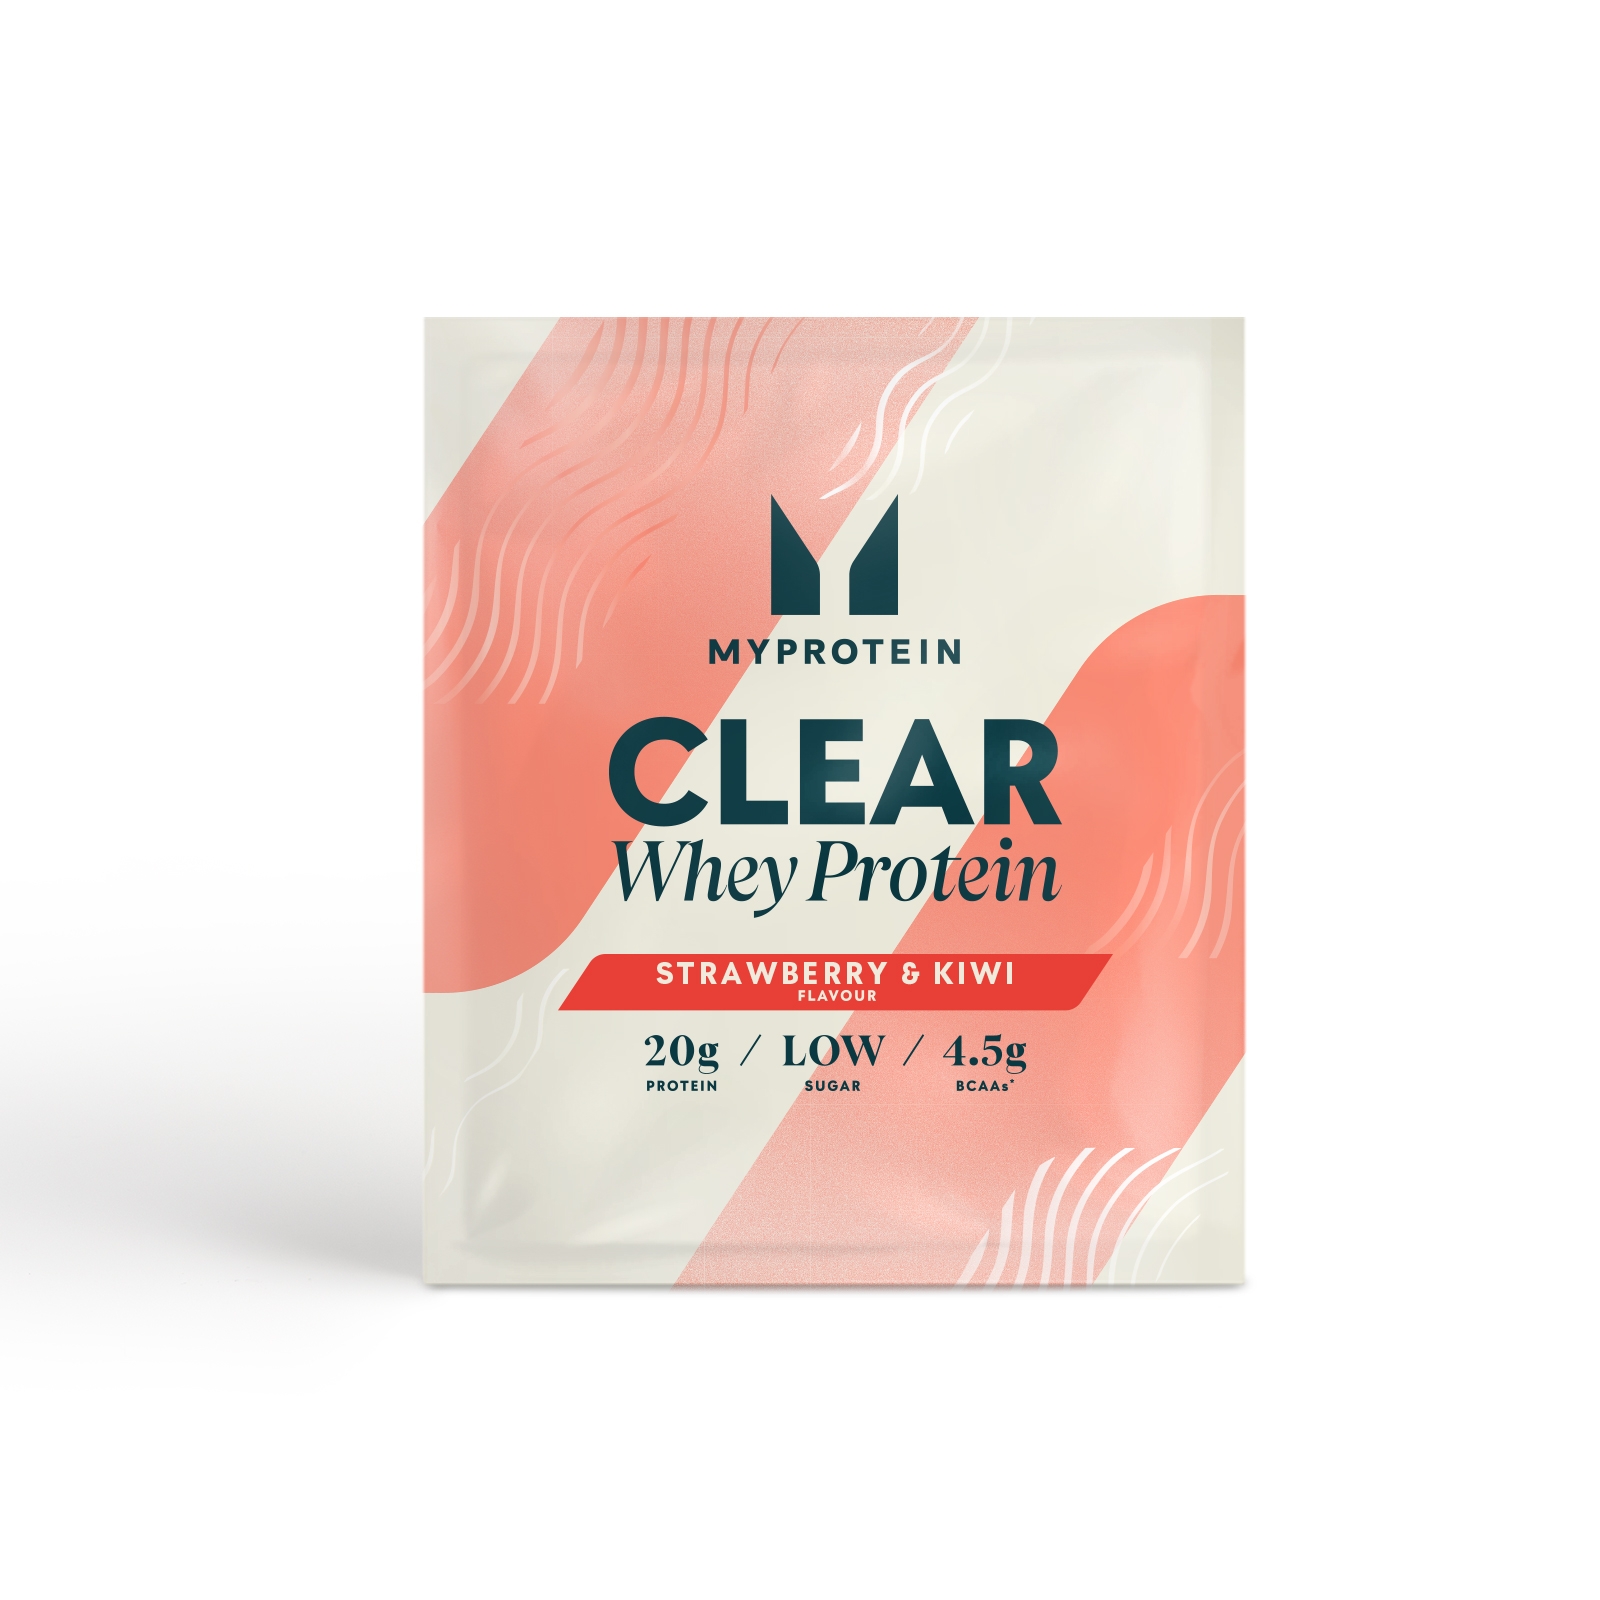 Myprotein Clear Whey Isolate (Sample) - 1servings - สตรอเบอร์รี่กีวี่